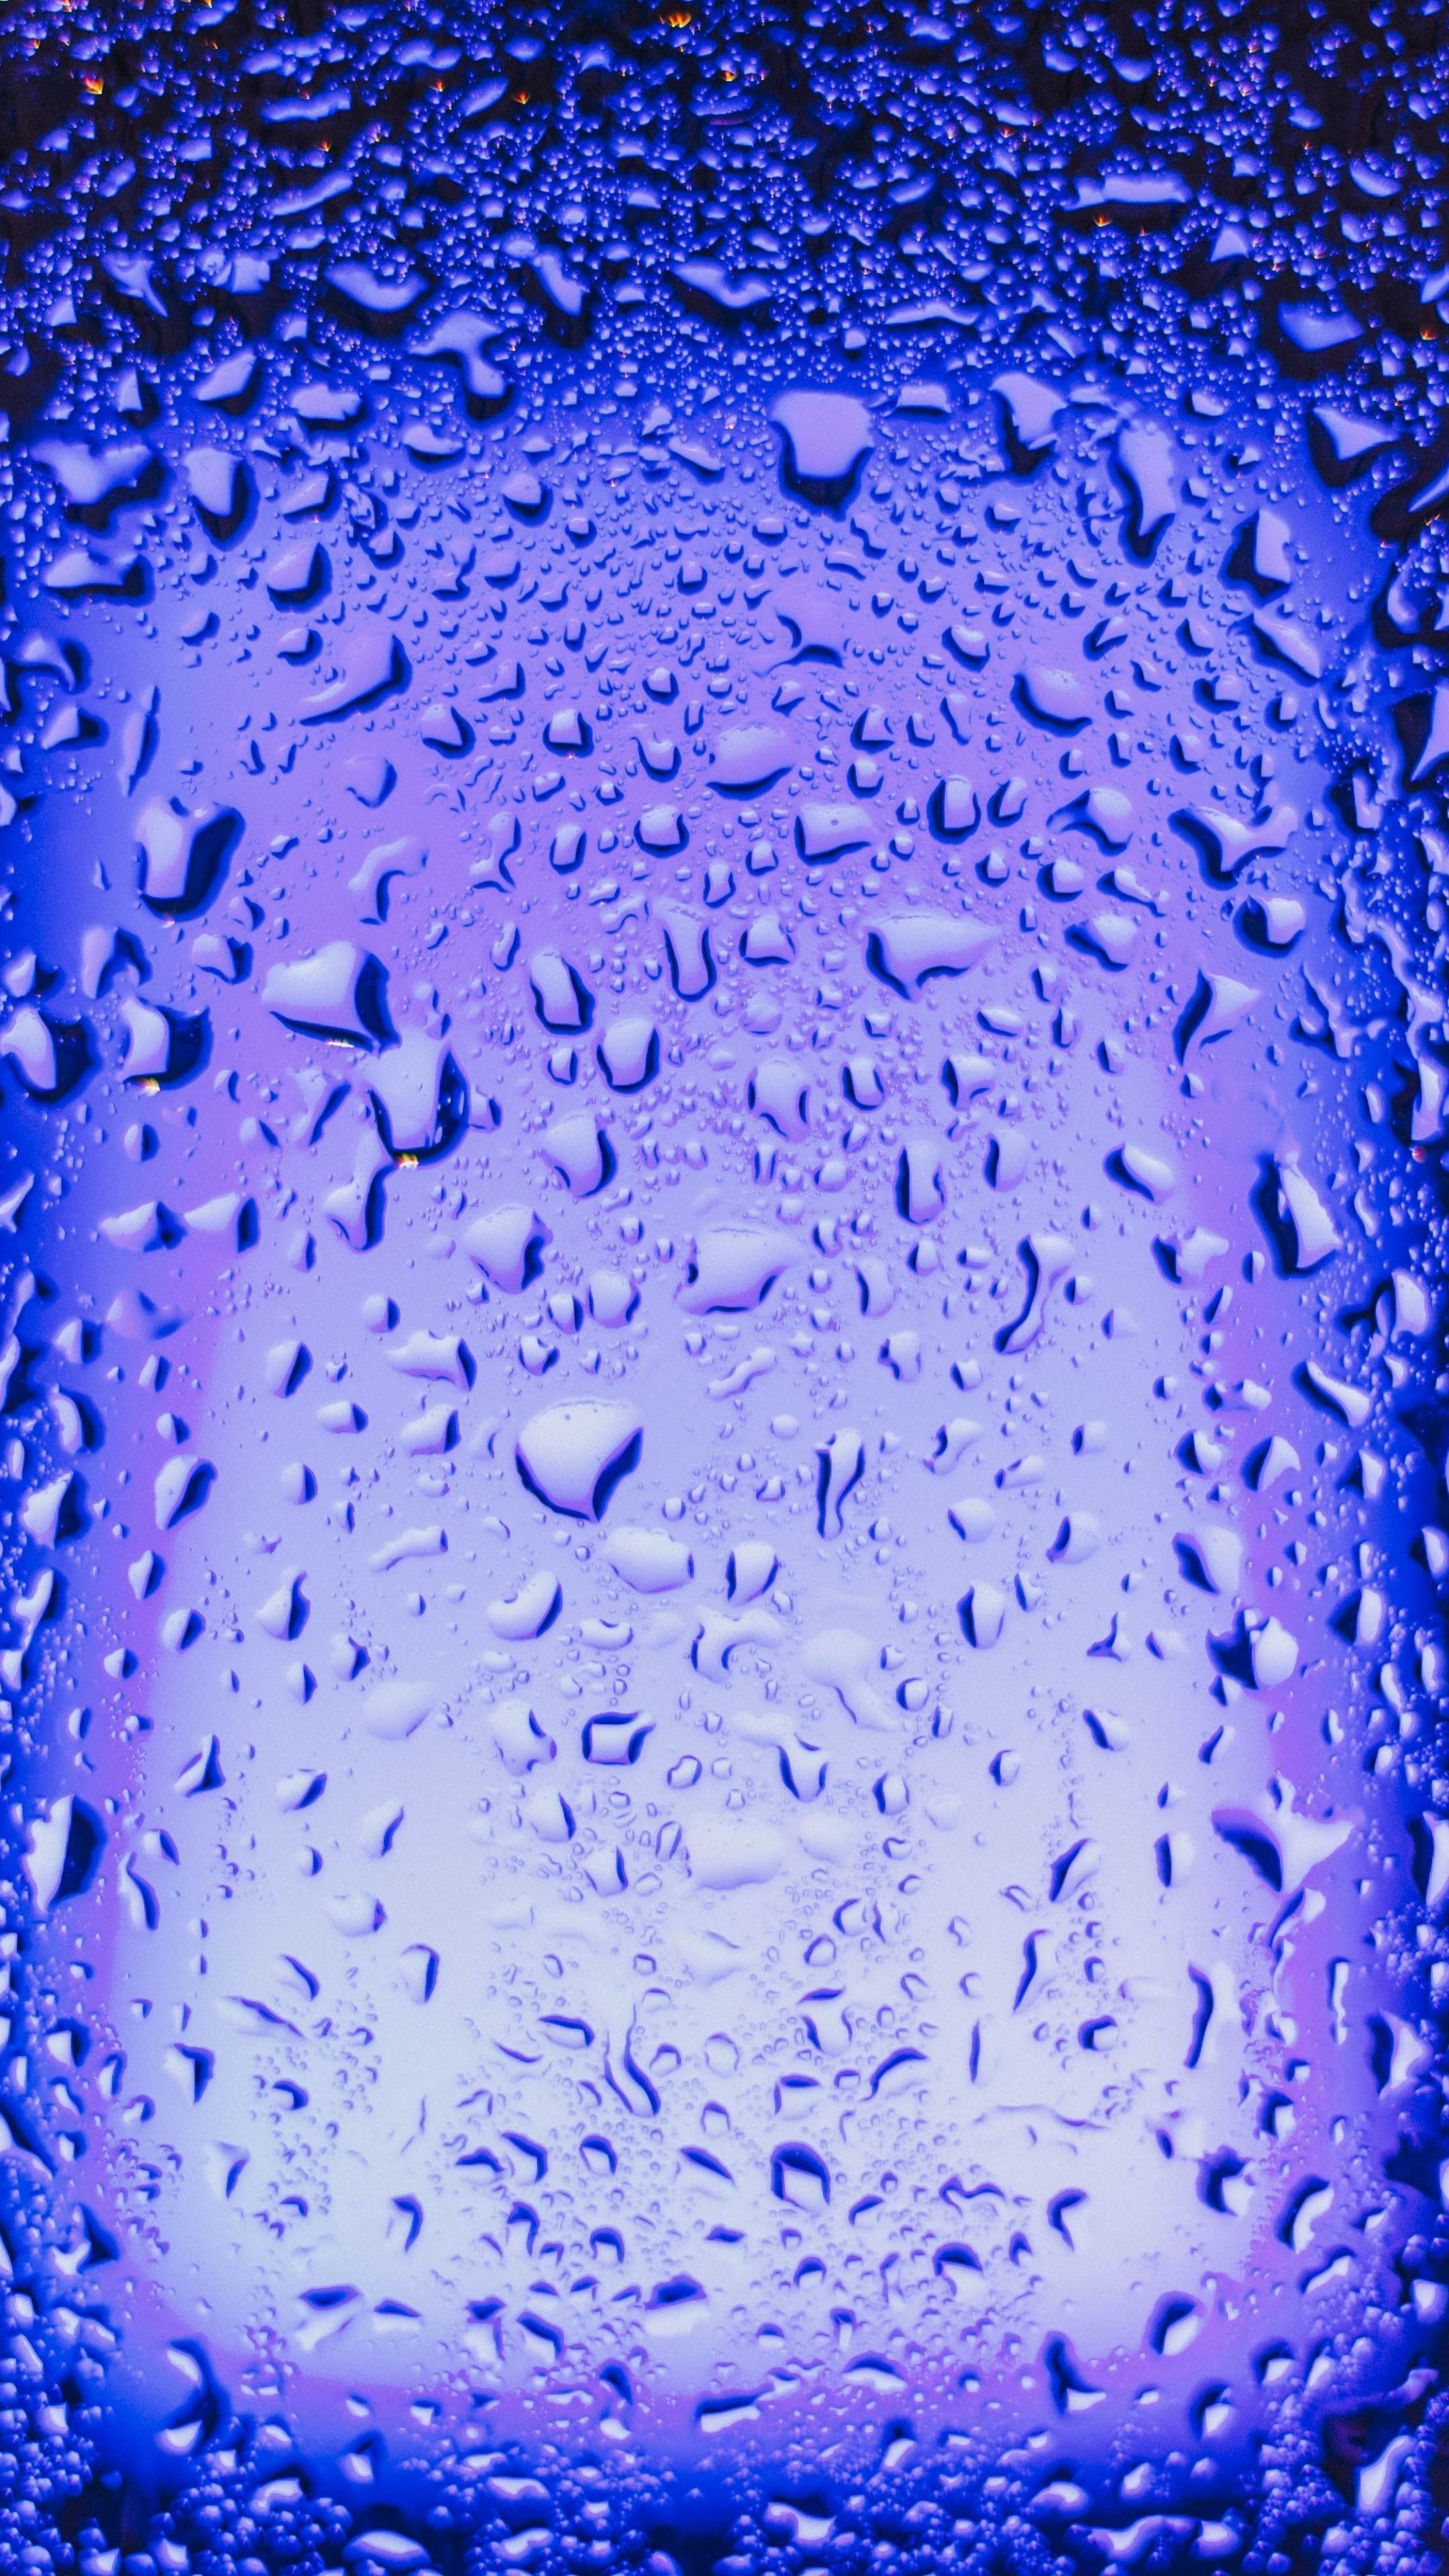 Water magic, Transparent surfaces, Neon droplets, Vibrant reflections, 2160x3840 4K Handy